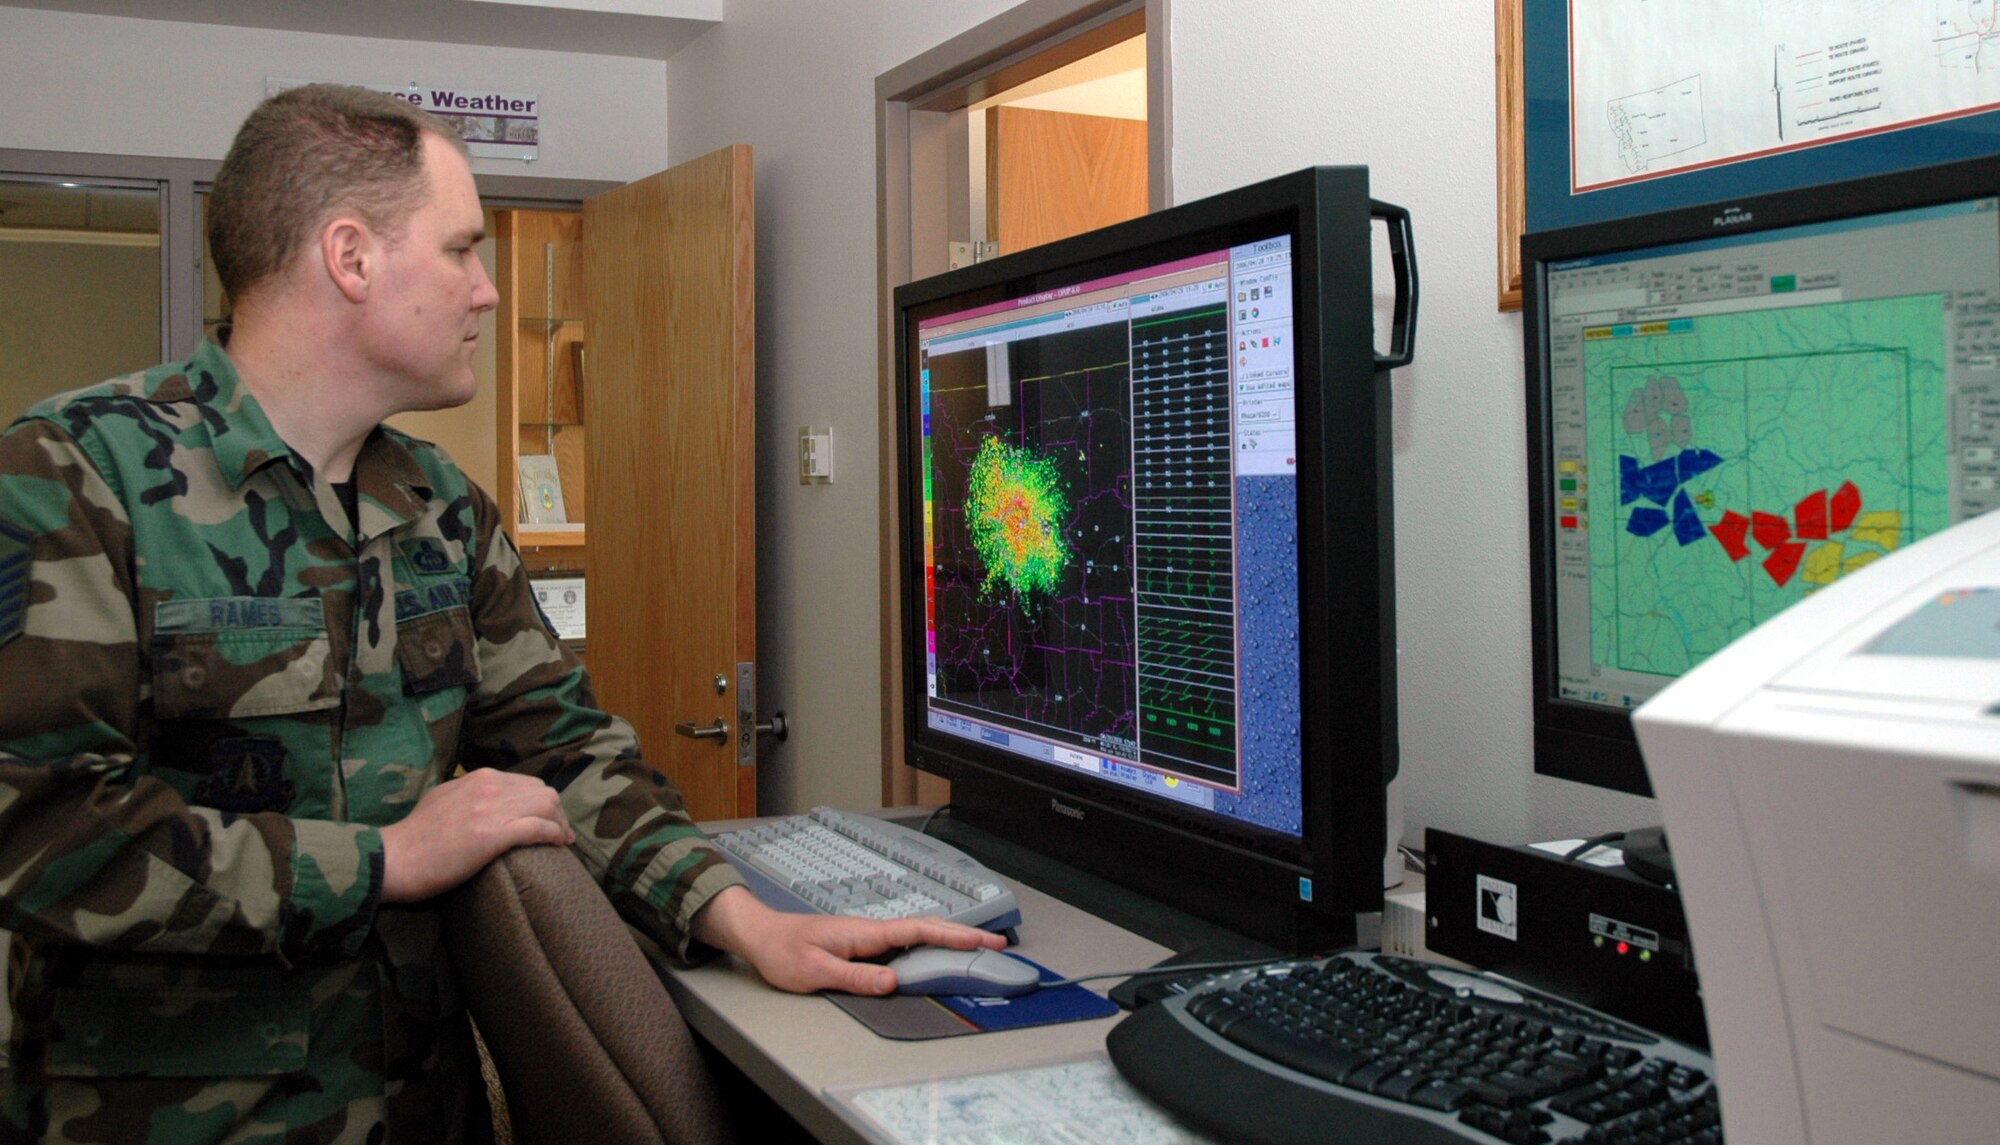 Master Sgt. Troy Rames, NCOIC of the Combat Weather Team, checks the radar screen for developing weather in the local area.